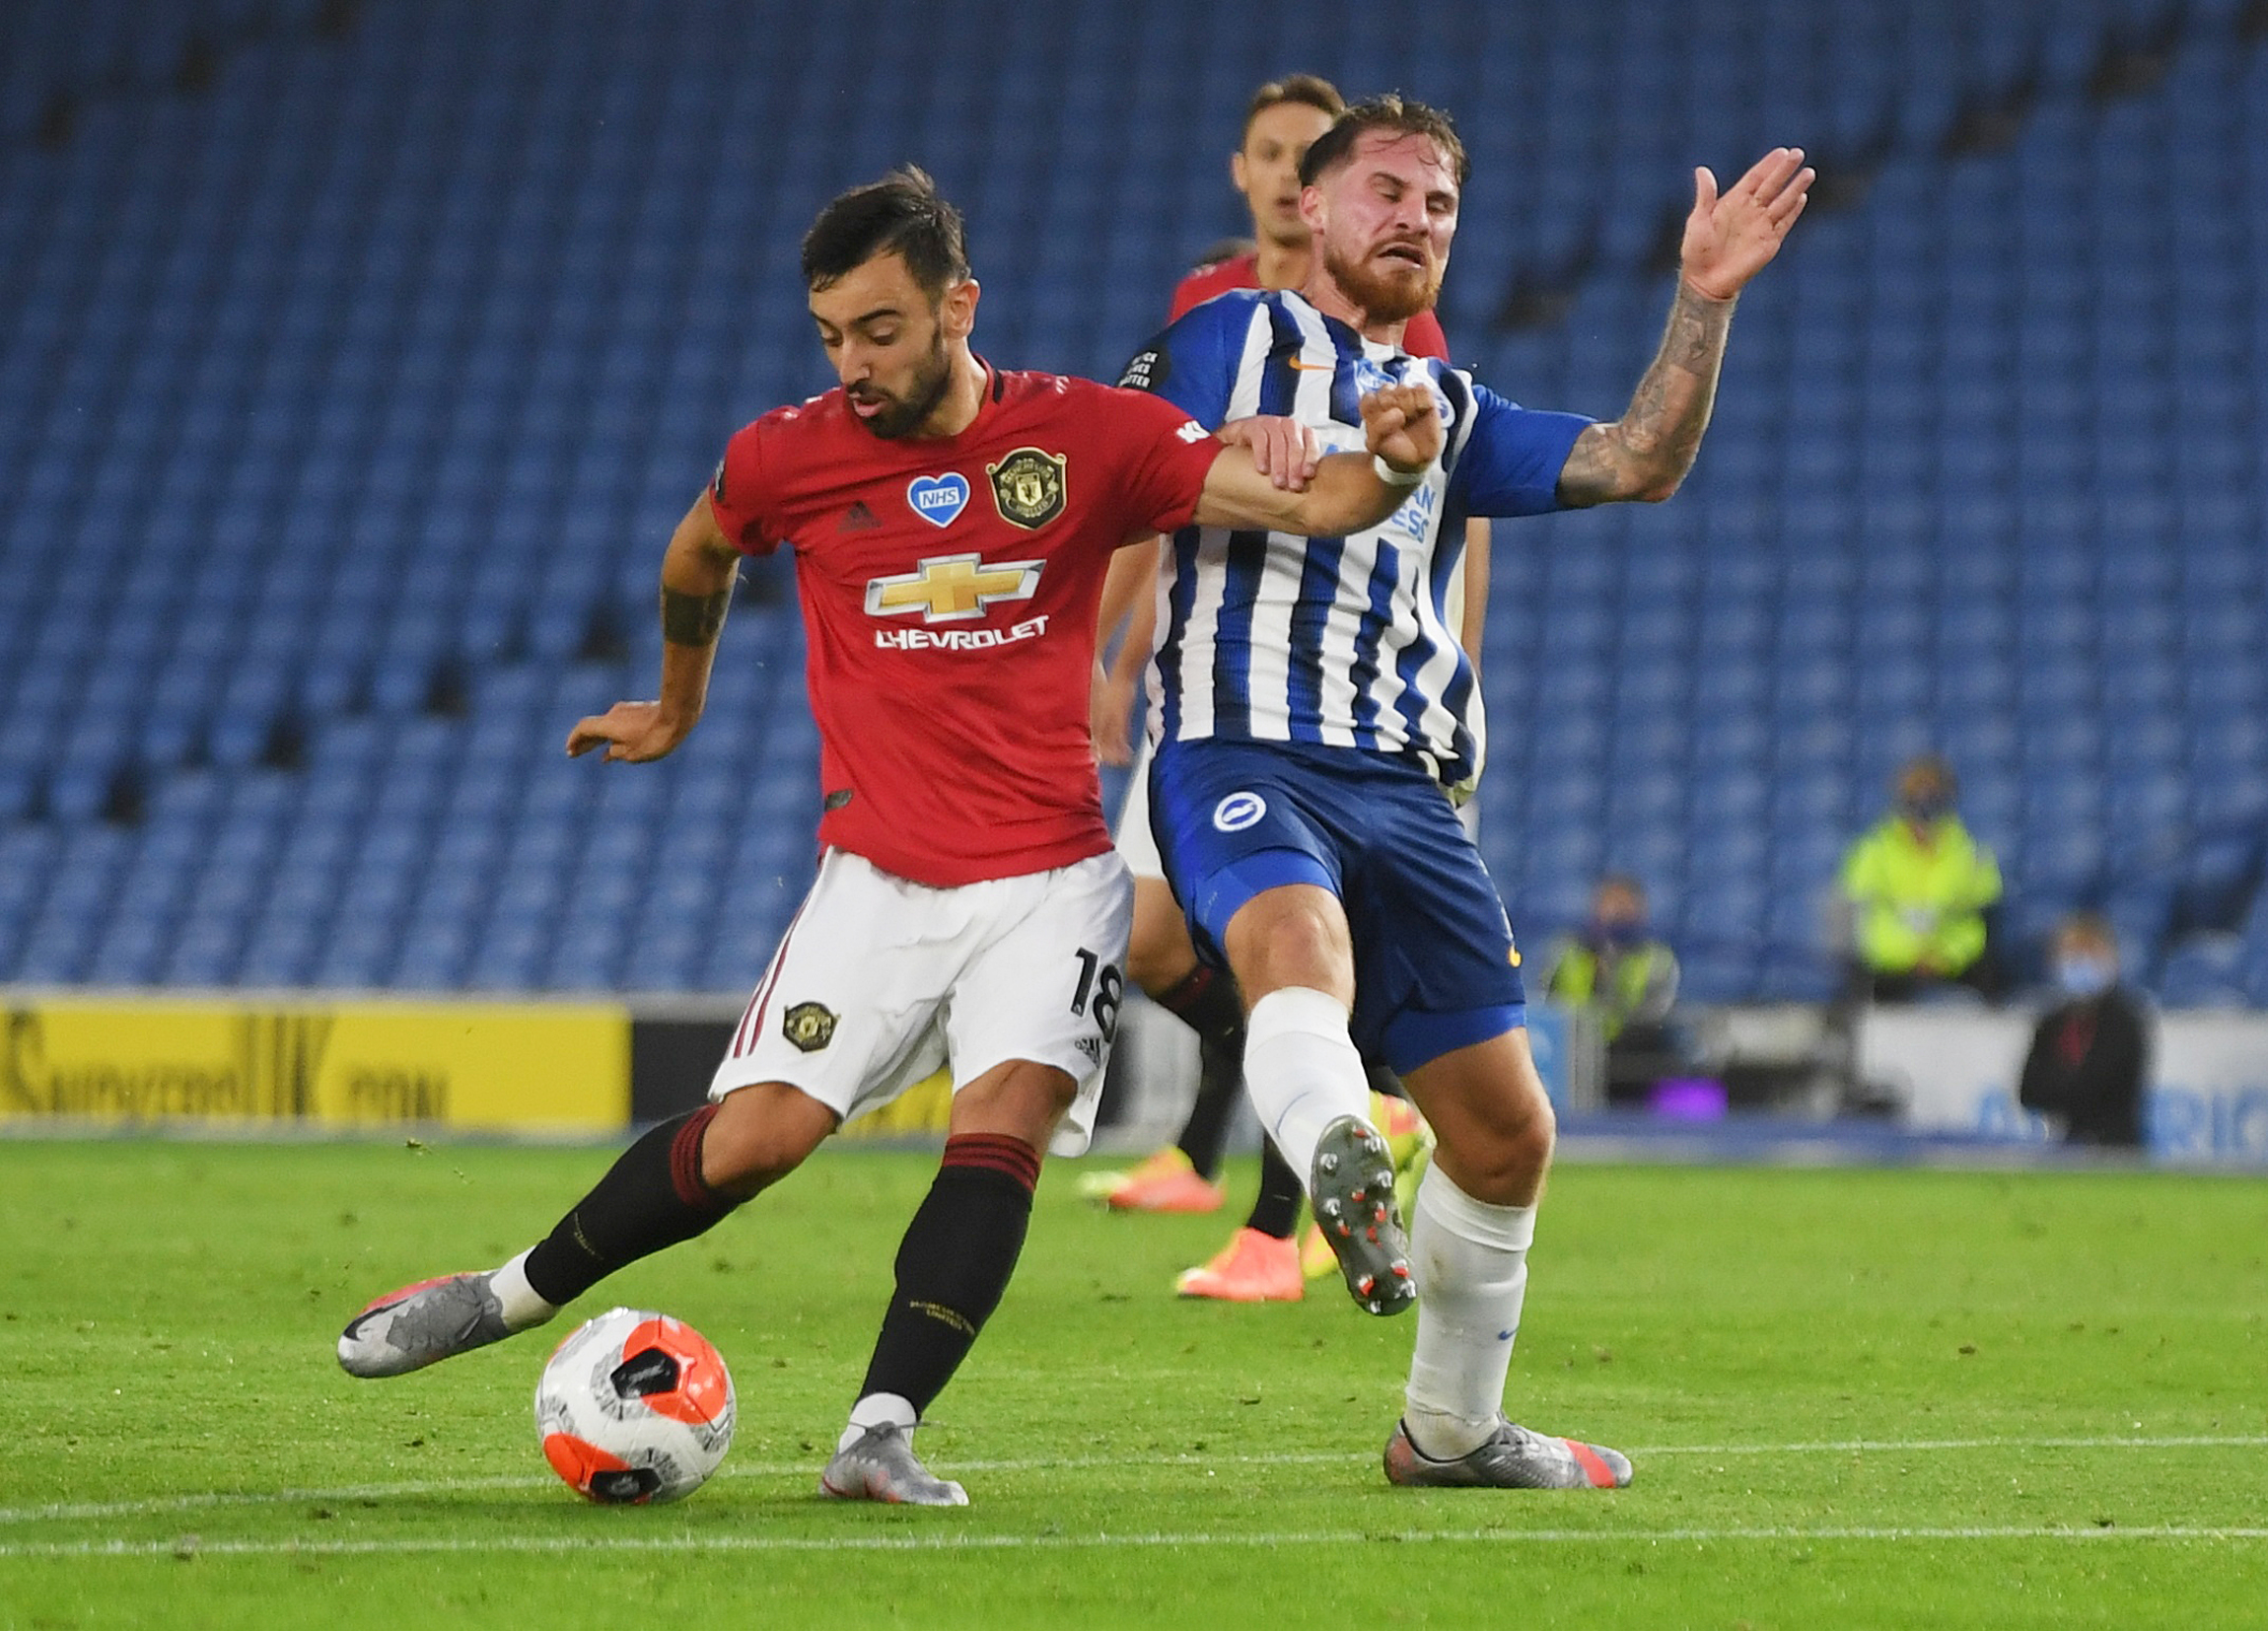 Manchester United's Bruno Fernandes scores their second goal, as play resumes behind closed doors following the outbreak of the coronavirus disease (COVID-19) during the Premier League -match between Brighton & Hove Albion and Manchester United, at The American Express Community Stadium, in Brighton, Britain, on June 30, 2020. Photo: Mike Hewitt/Pool via Reuters